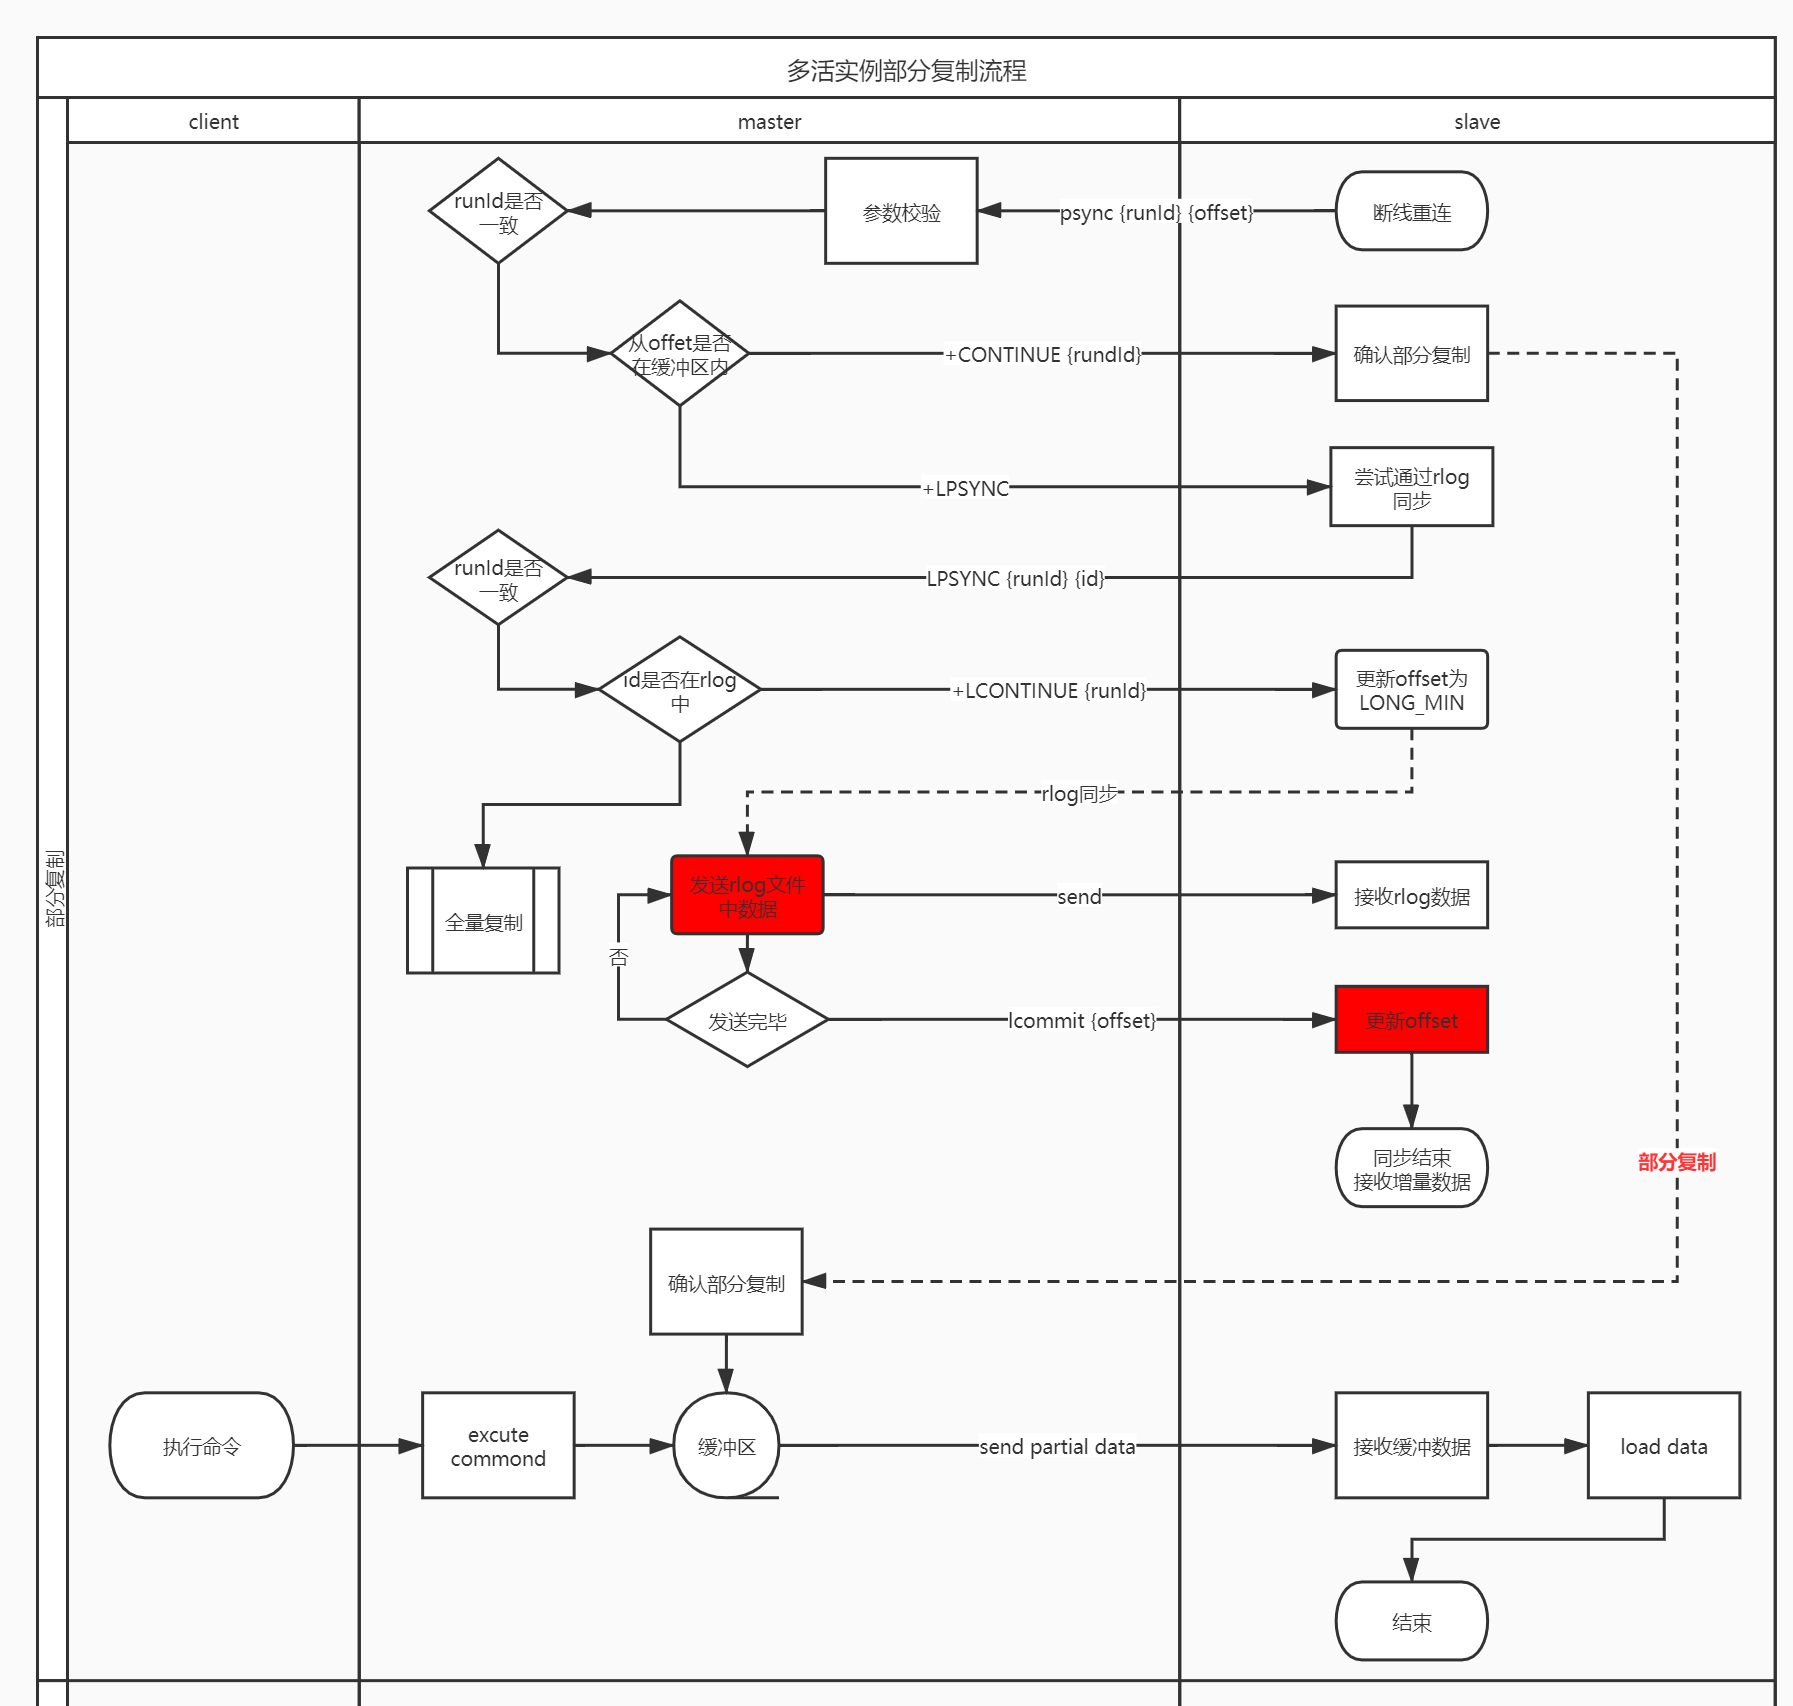 Partial replication flow chart of multi-active redis instance